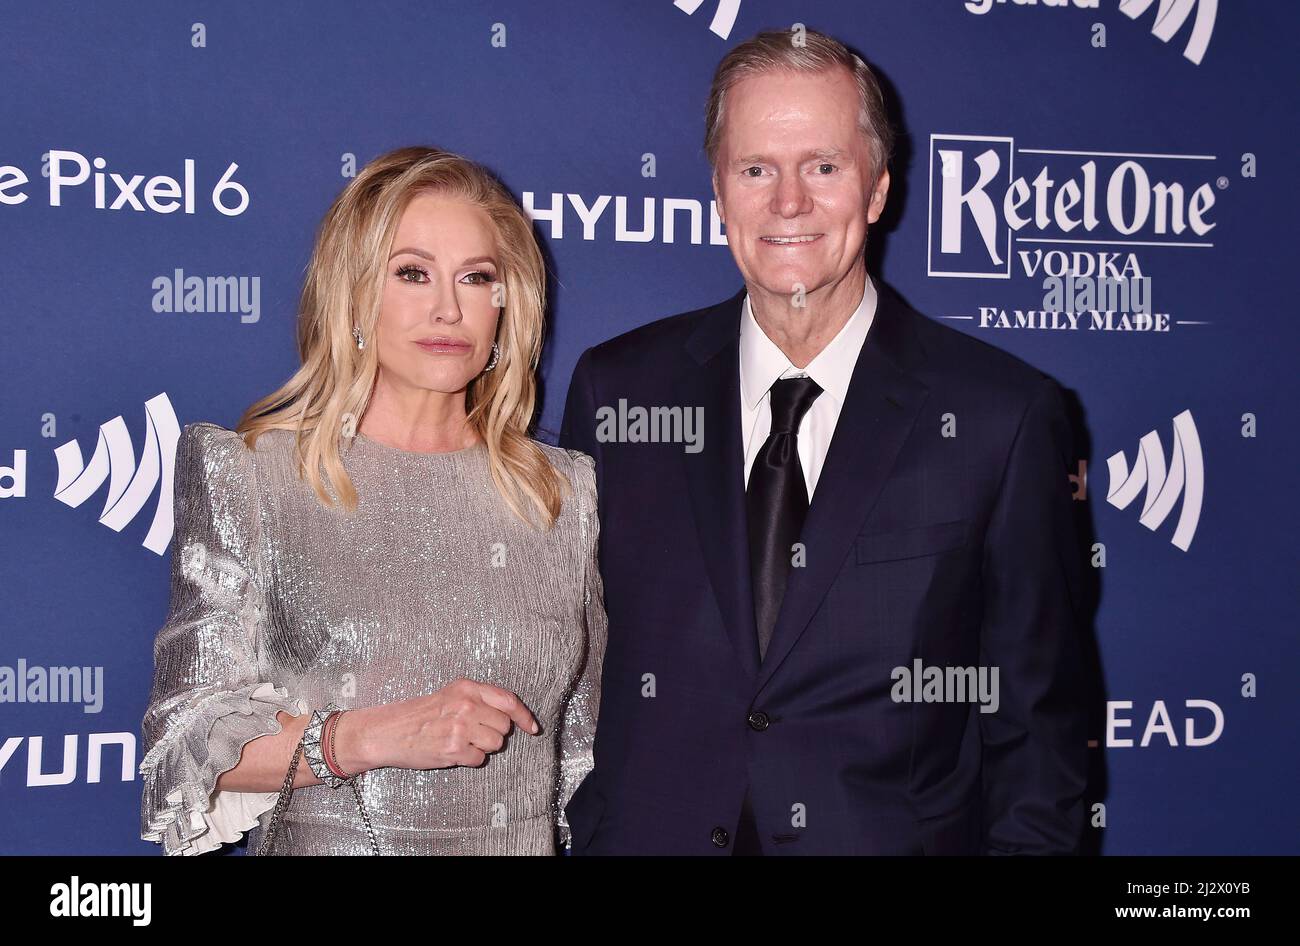 Beverly Hills, Ca. 02nd Apr, 2022. Kathy Hilton (L) and Rick Hilton attend the 33rd Annual GLAAD Media Awards at the Beverly Hilton Hotel on April 02, 2022 in Beverly Hills, California. Credit: Jeffrey Mayer/Jtm Photos/Media Punch/Alamy Live News Stock Photo